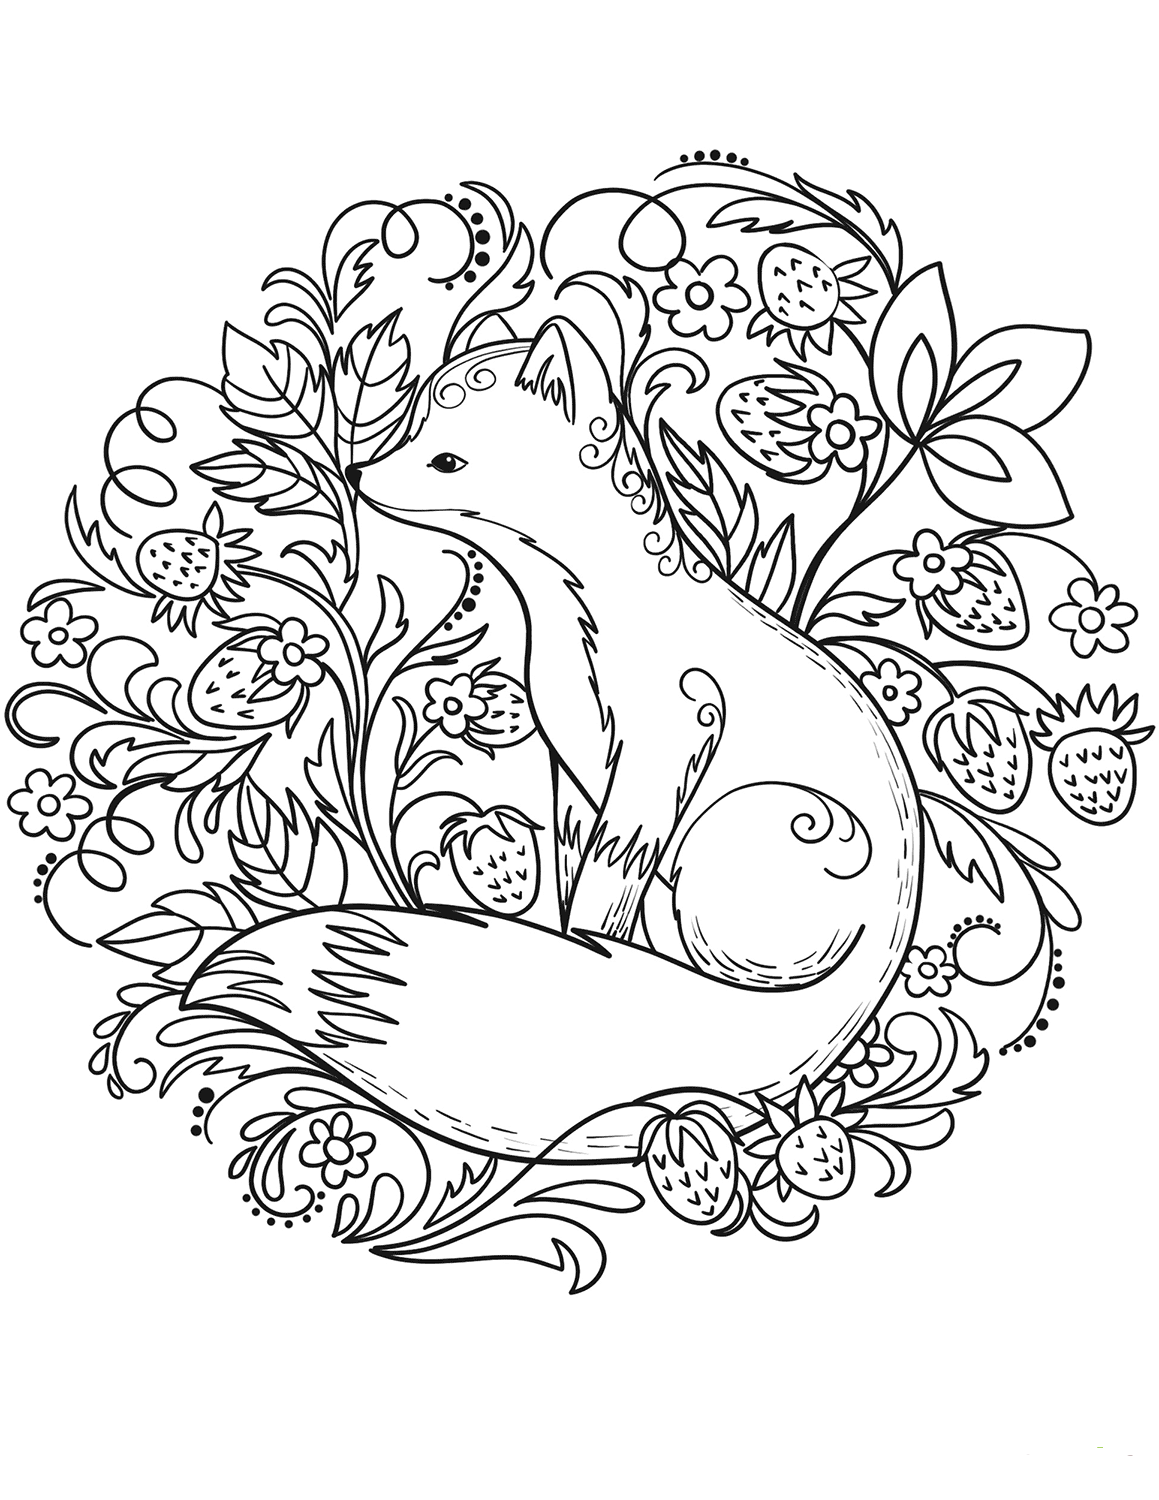 Fox Coloring Pages - Free Printable Coloring Pages at ColoringOnly.com